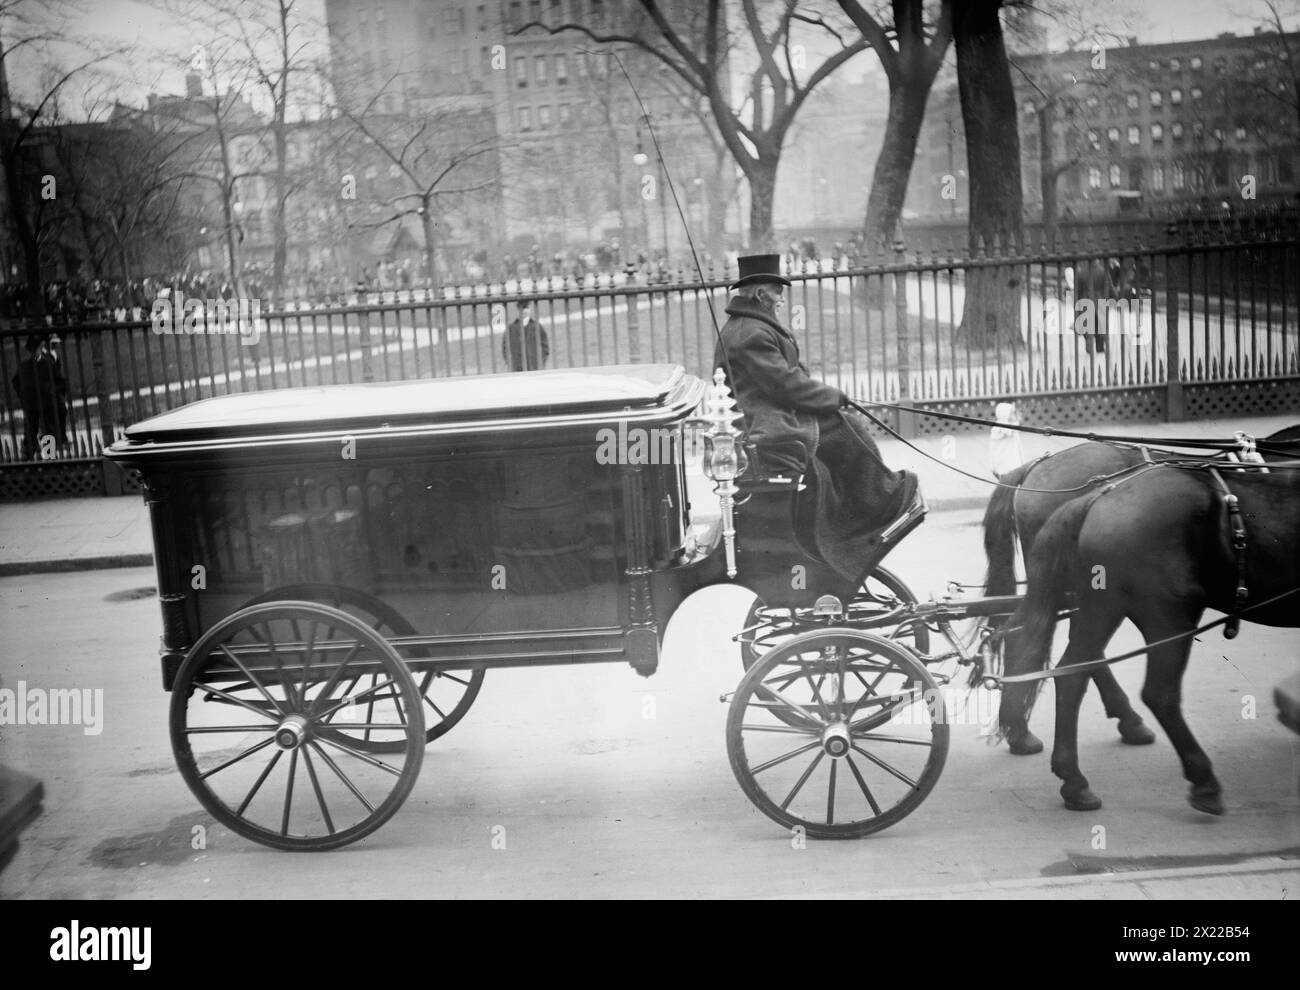 J.P. Morgan hearse, Stuyvesant Sq., 1913. Shows funeral of financier John Pierpont Morgan (1837-1913) which took place on April 14, 1913 in New York City. Stock Photo